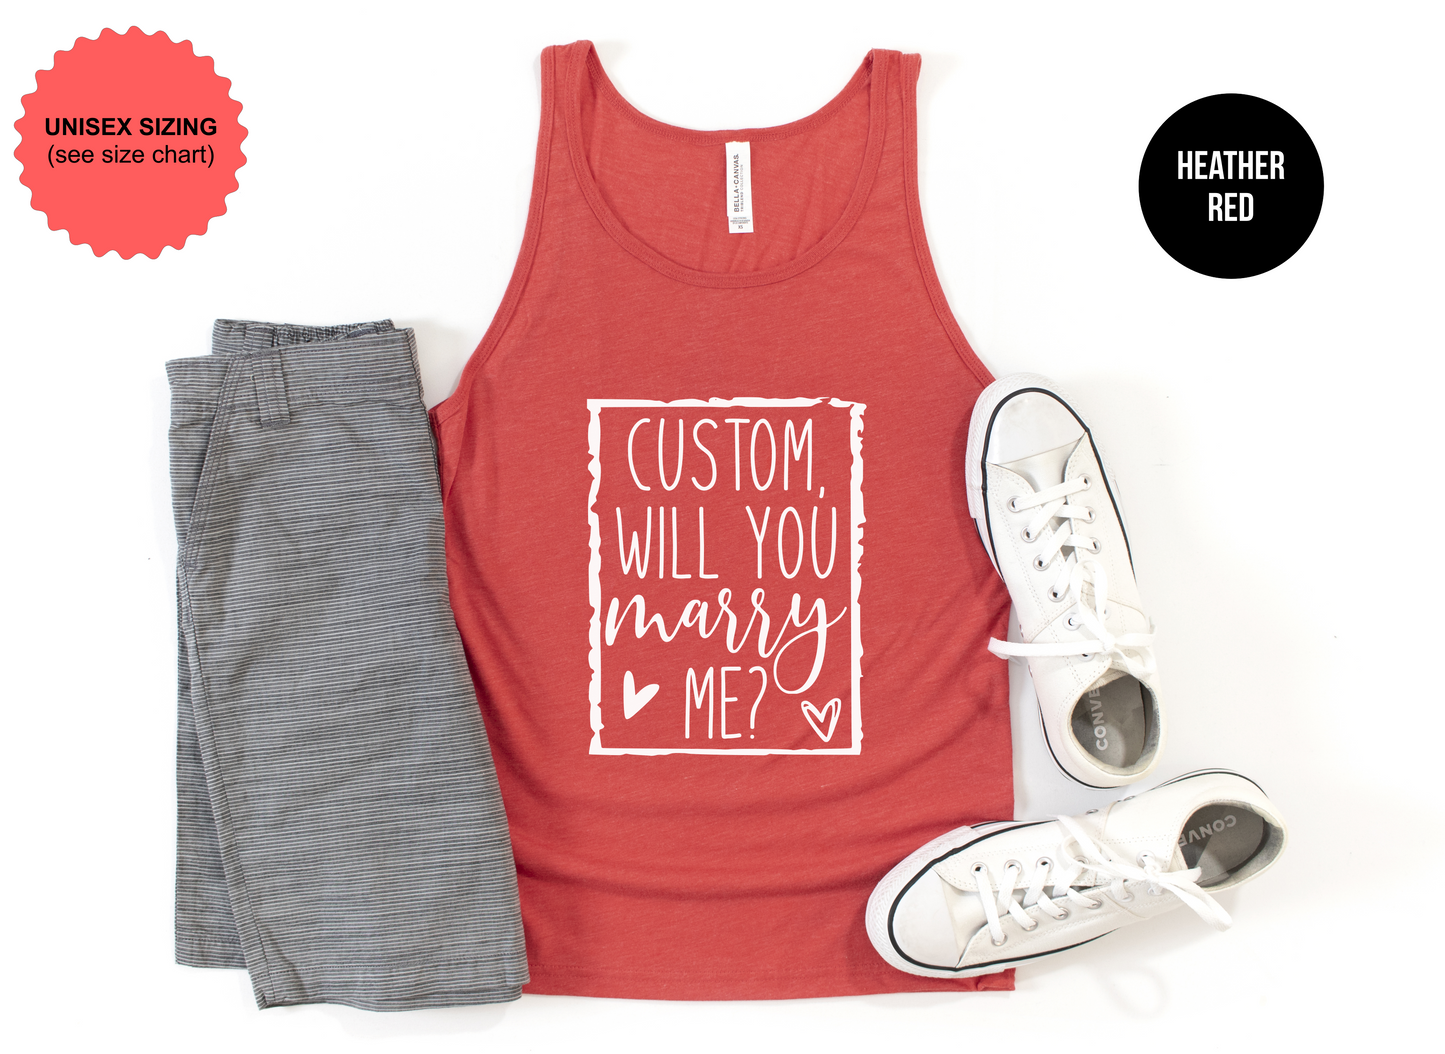 Will You Marry Me Tank Top